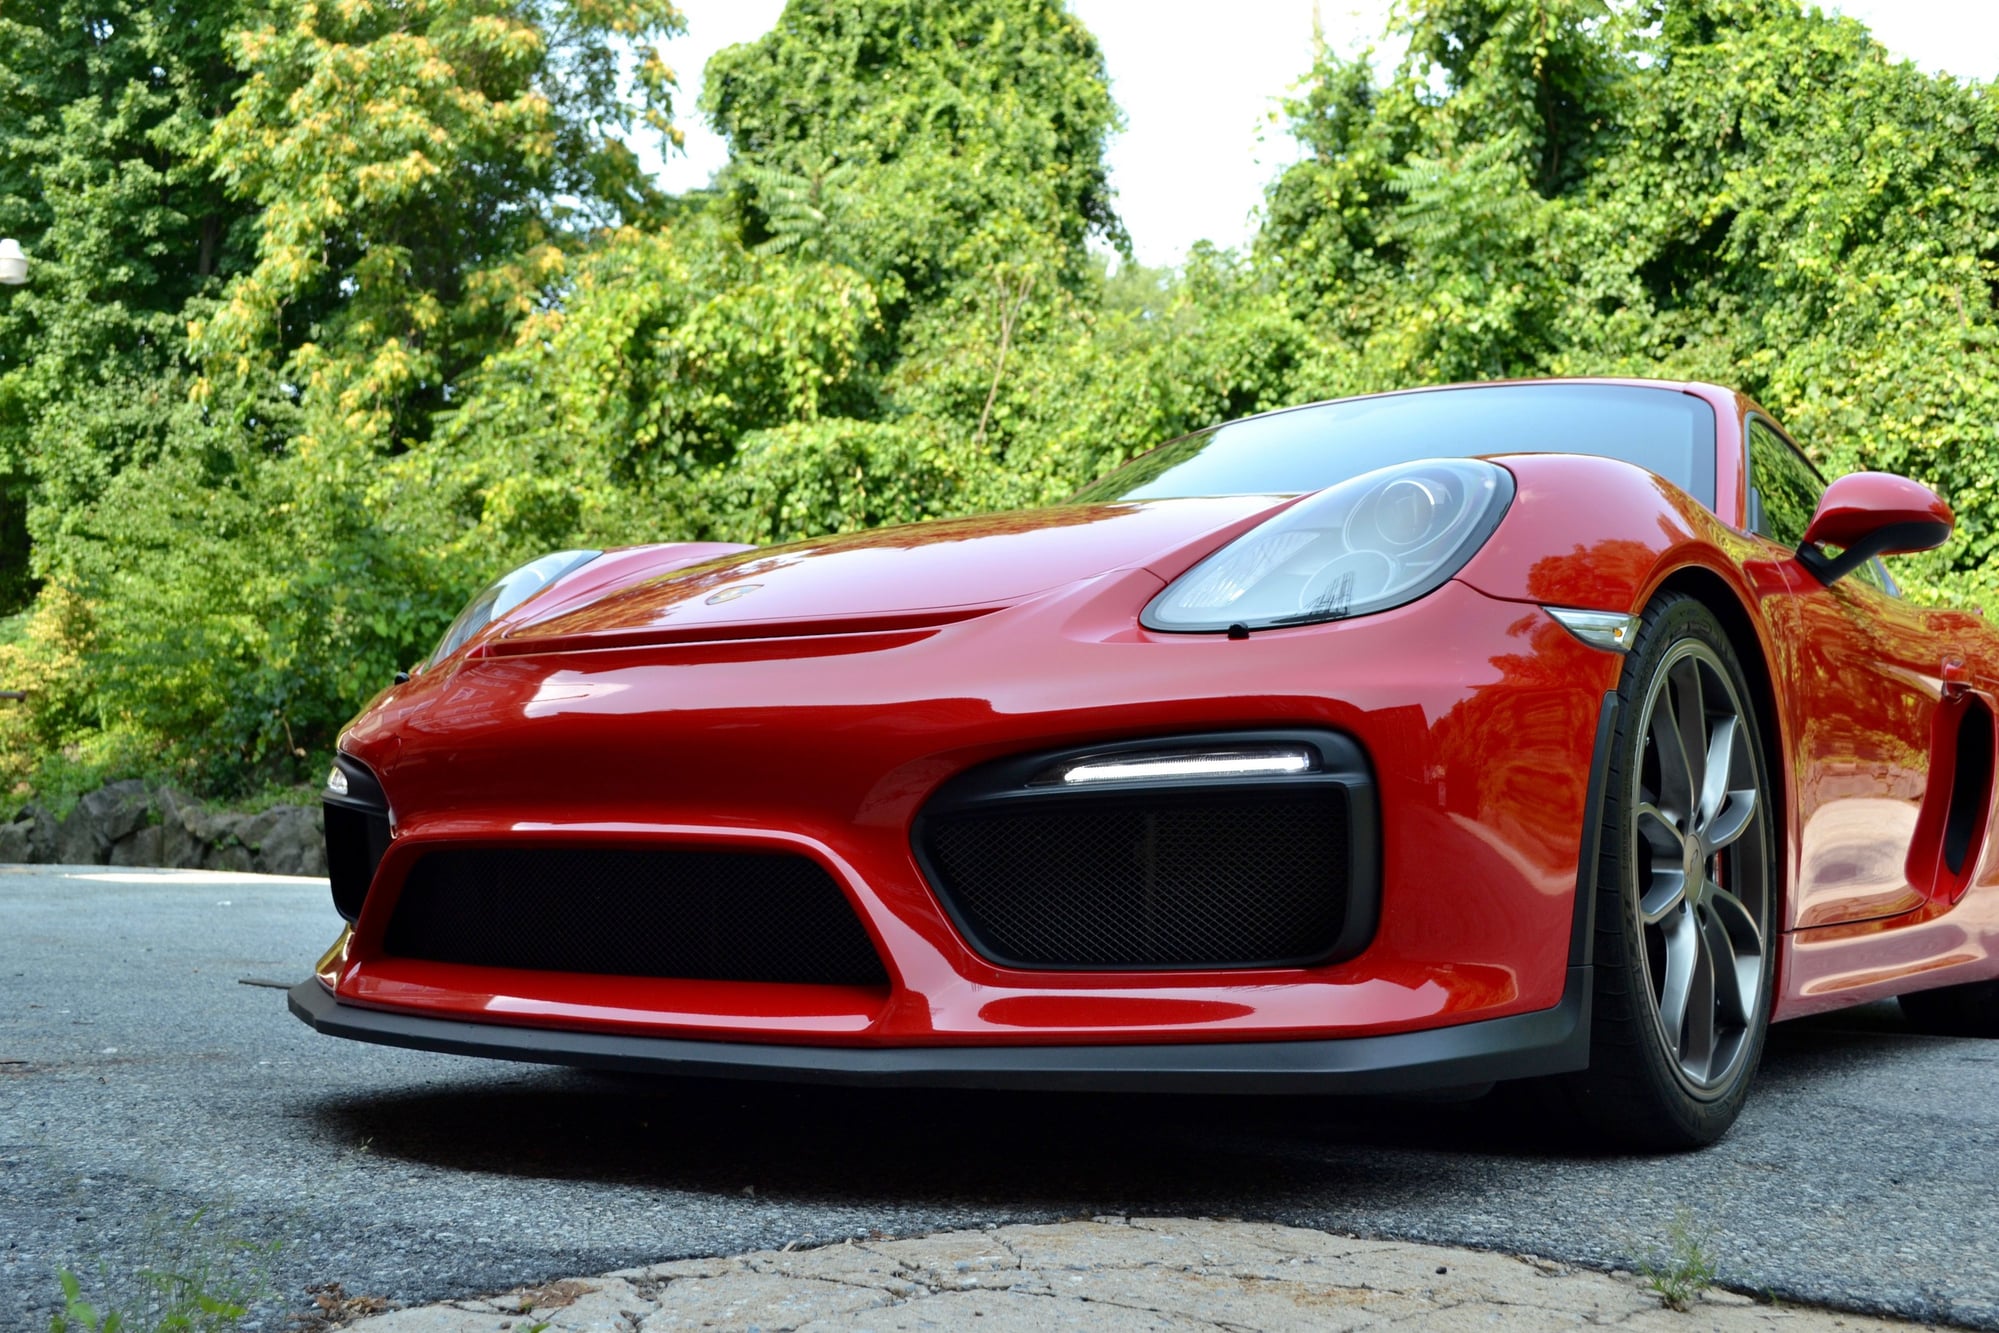 2016 Porsche Cayman GT4 - Guards Red Porsche Cayman GT4 (Light Weight Buckets, Perfect DME, Not tracked) - Used - VIN WP0AC2A89GK191119 - 11,960 Miles - 6 cyl - 2WD - Manual - Coupe - Red - New Rochelle, NY 10801, United States